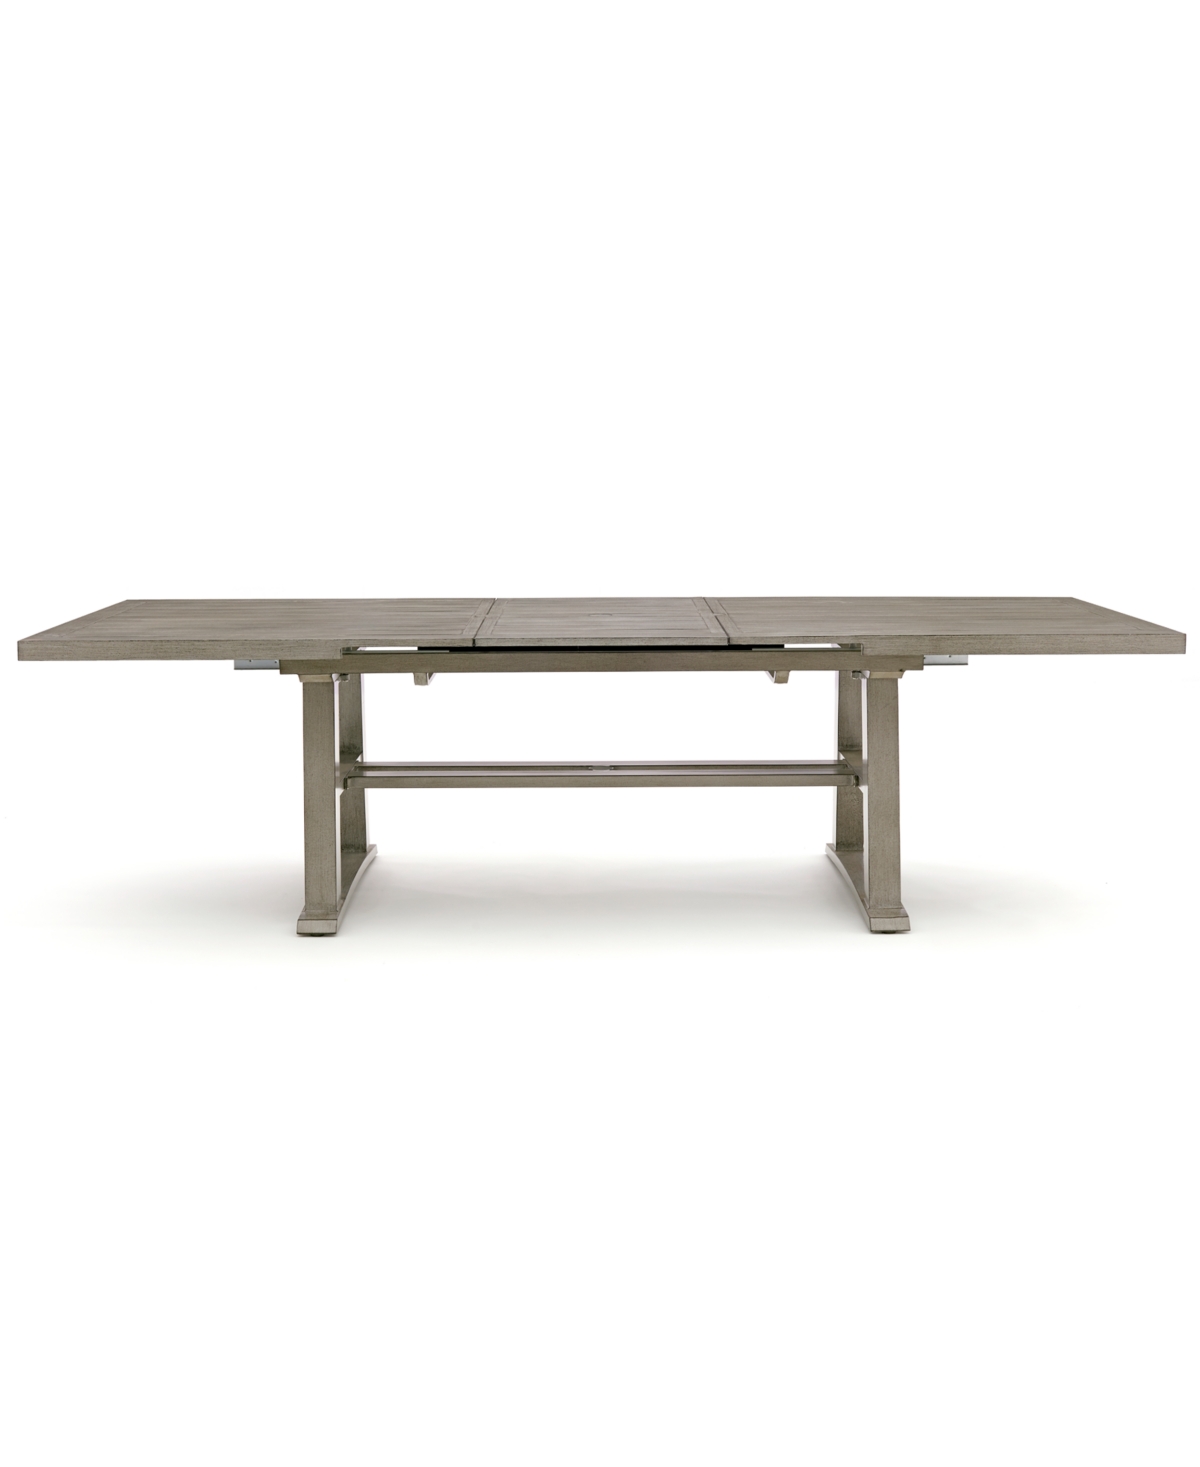 Wayland Aluminum 87 x 40 (extends to 110) Outdoor Extension Dining Table, Created for Macys